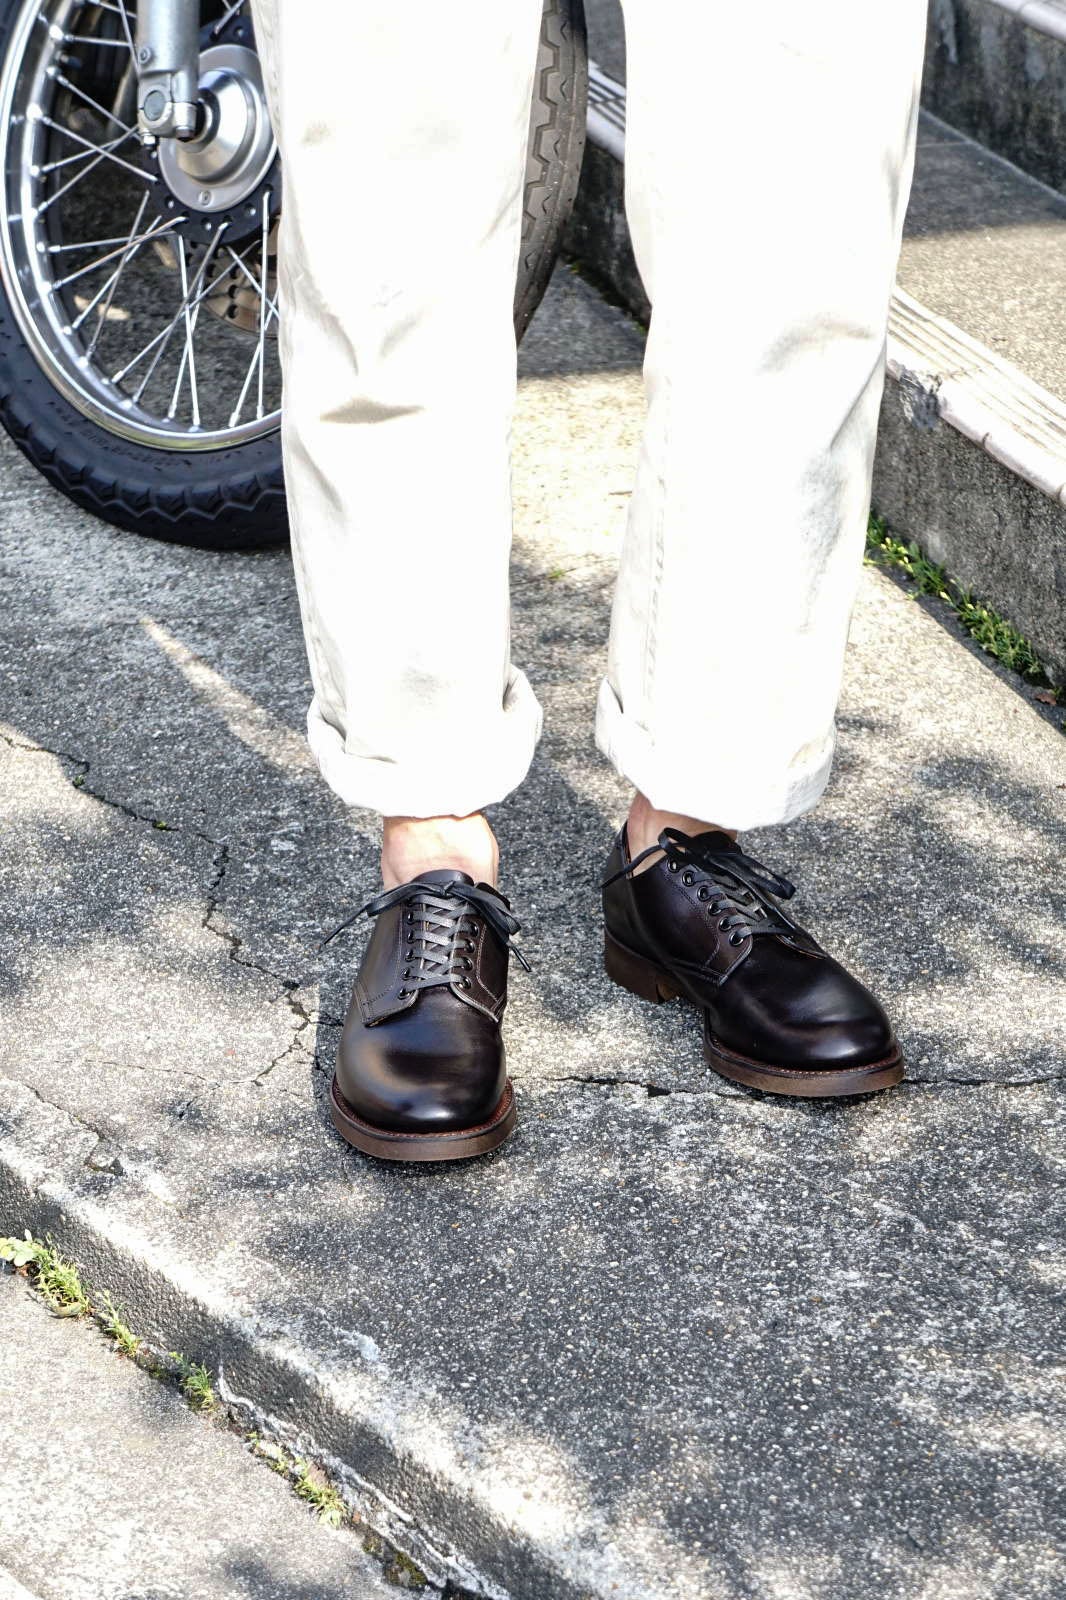 CLINCH Service shoes New Arrival !! | B.S.W. market place Blog